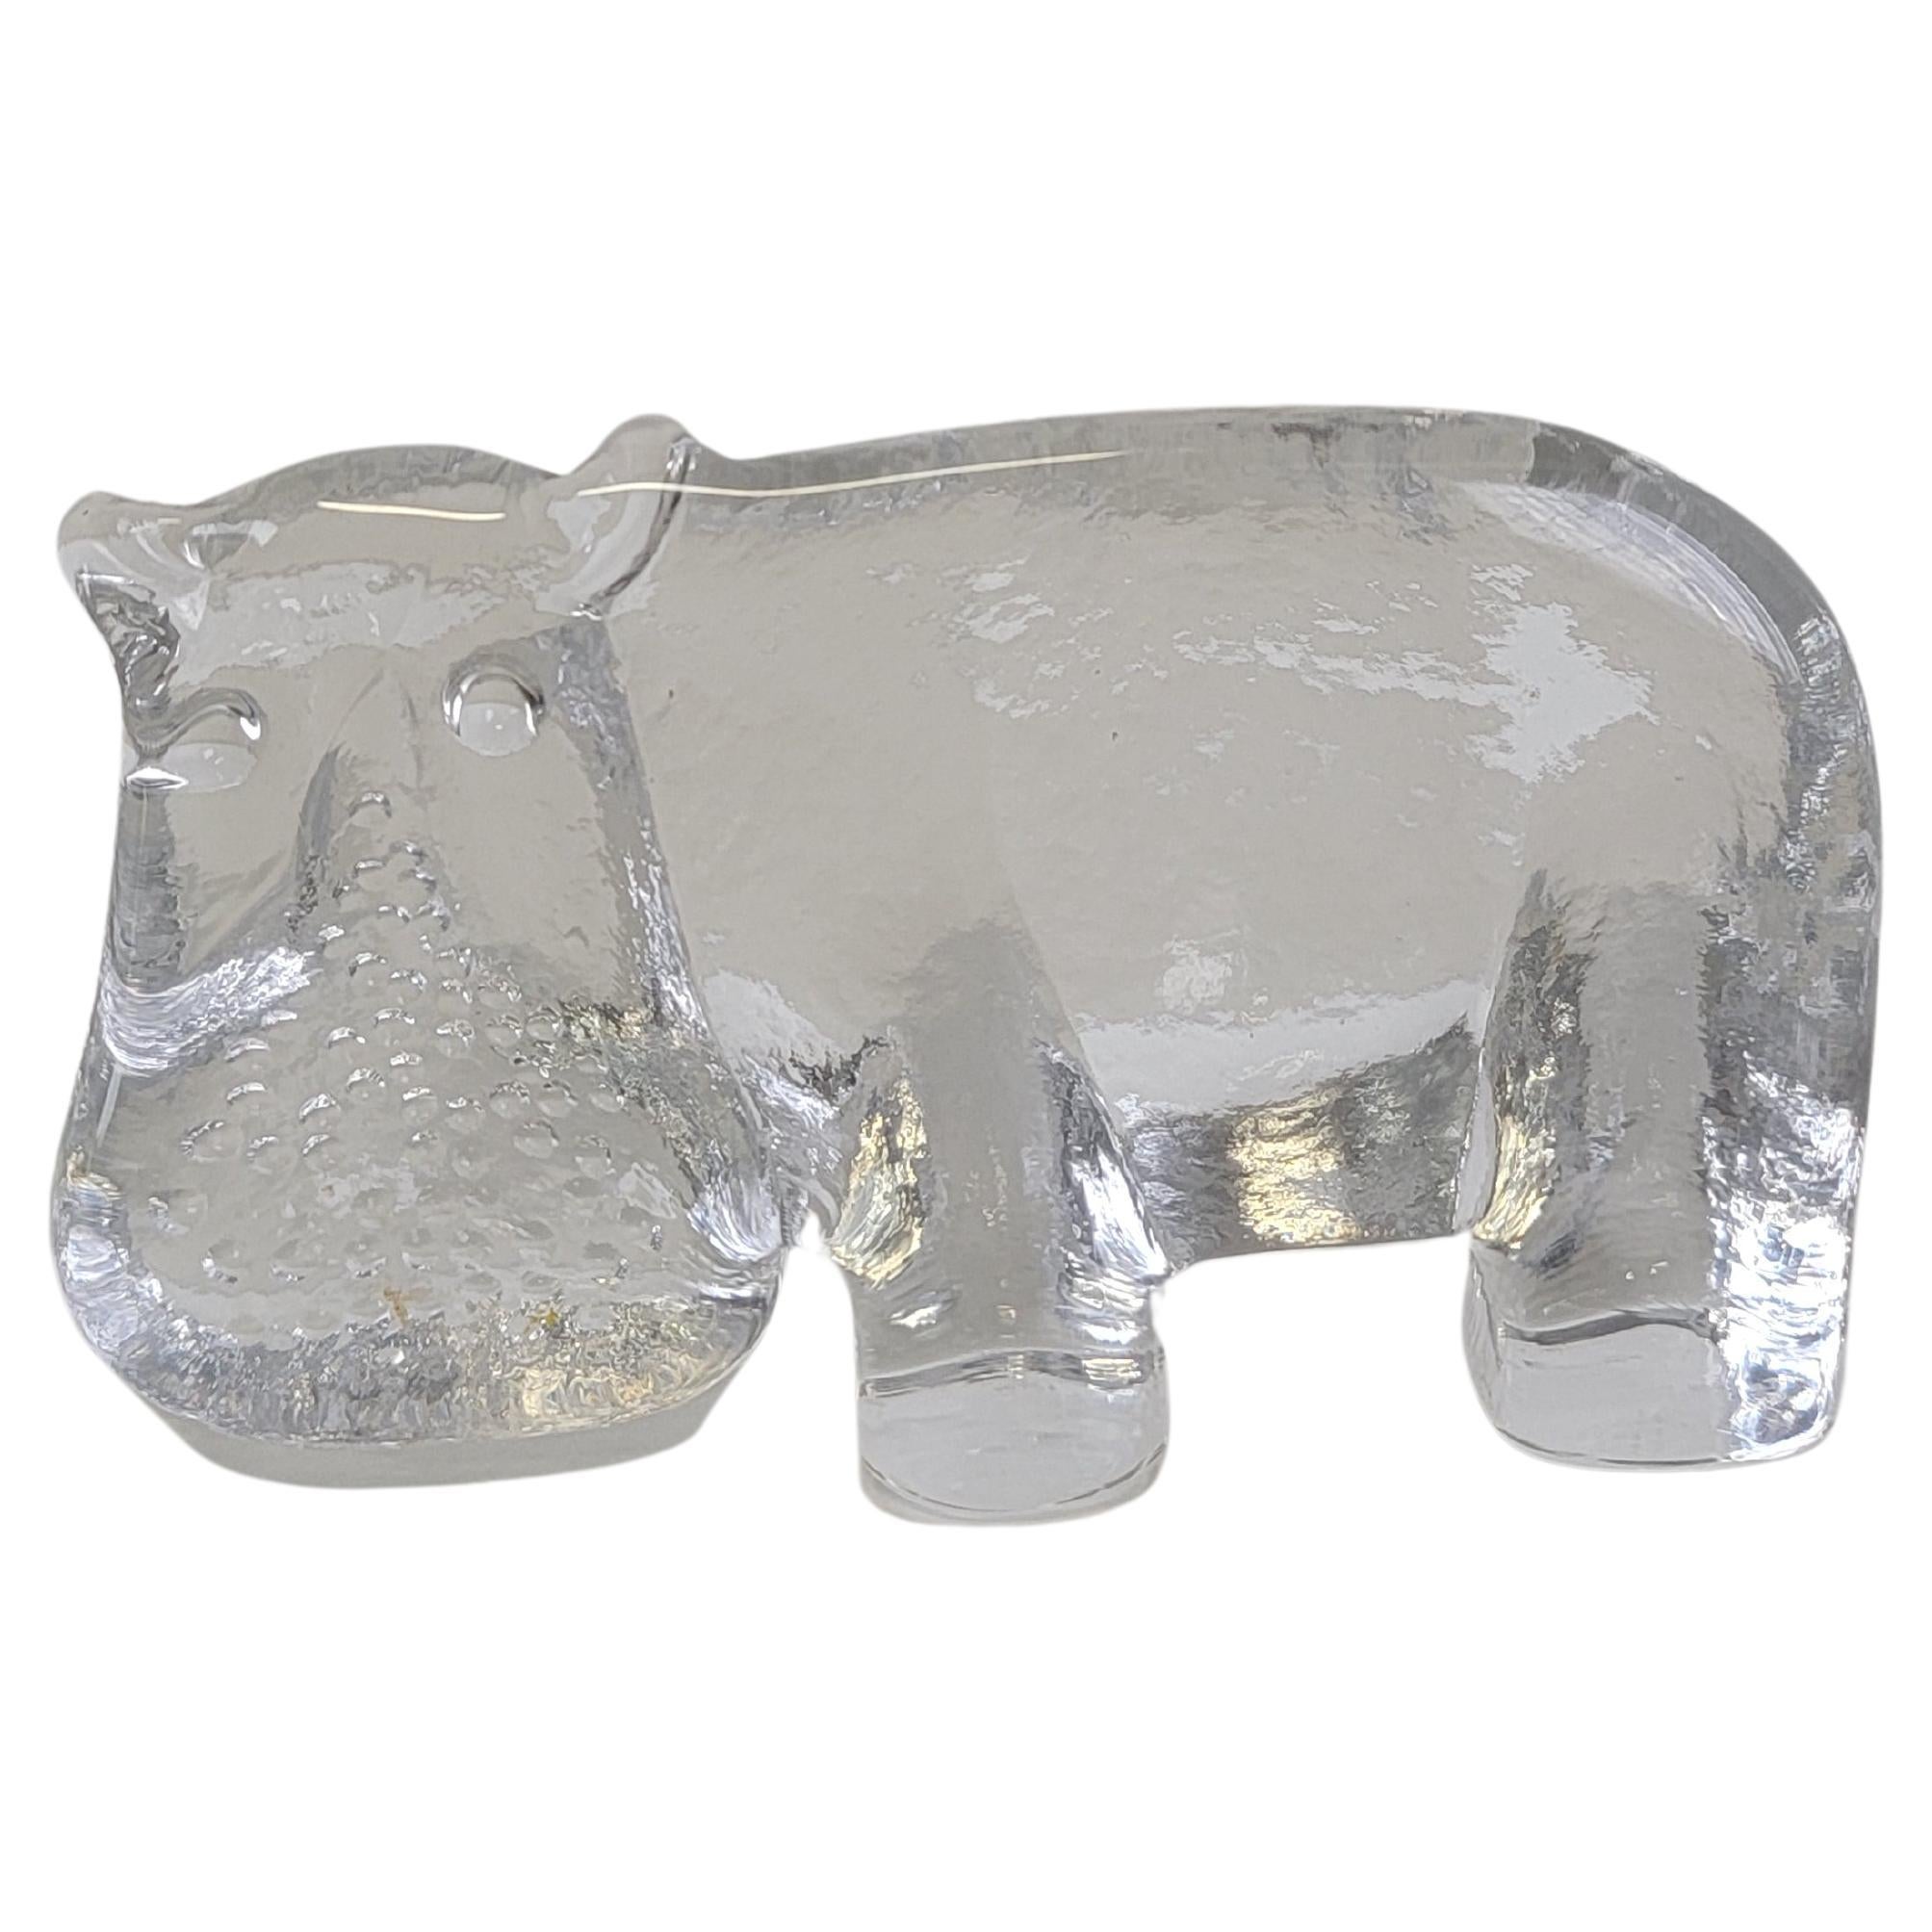 Glass hippopotamus by Bertil Vallien for Kosta Boda. Vallien created a zoo animal series for Kosta Boda in 1975 which was called the “Boda Zoo”. It featured zoo animals such as lions, hippopotamus, rhino, giraffe, horse, tiger, and more. The zoo